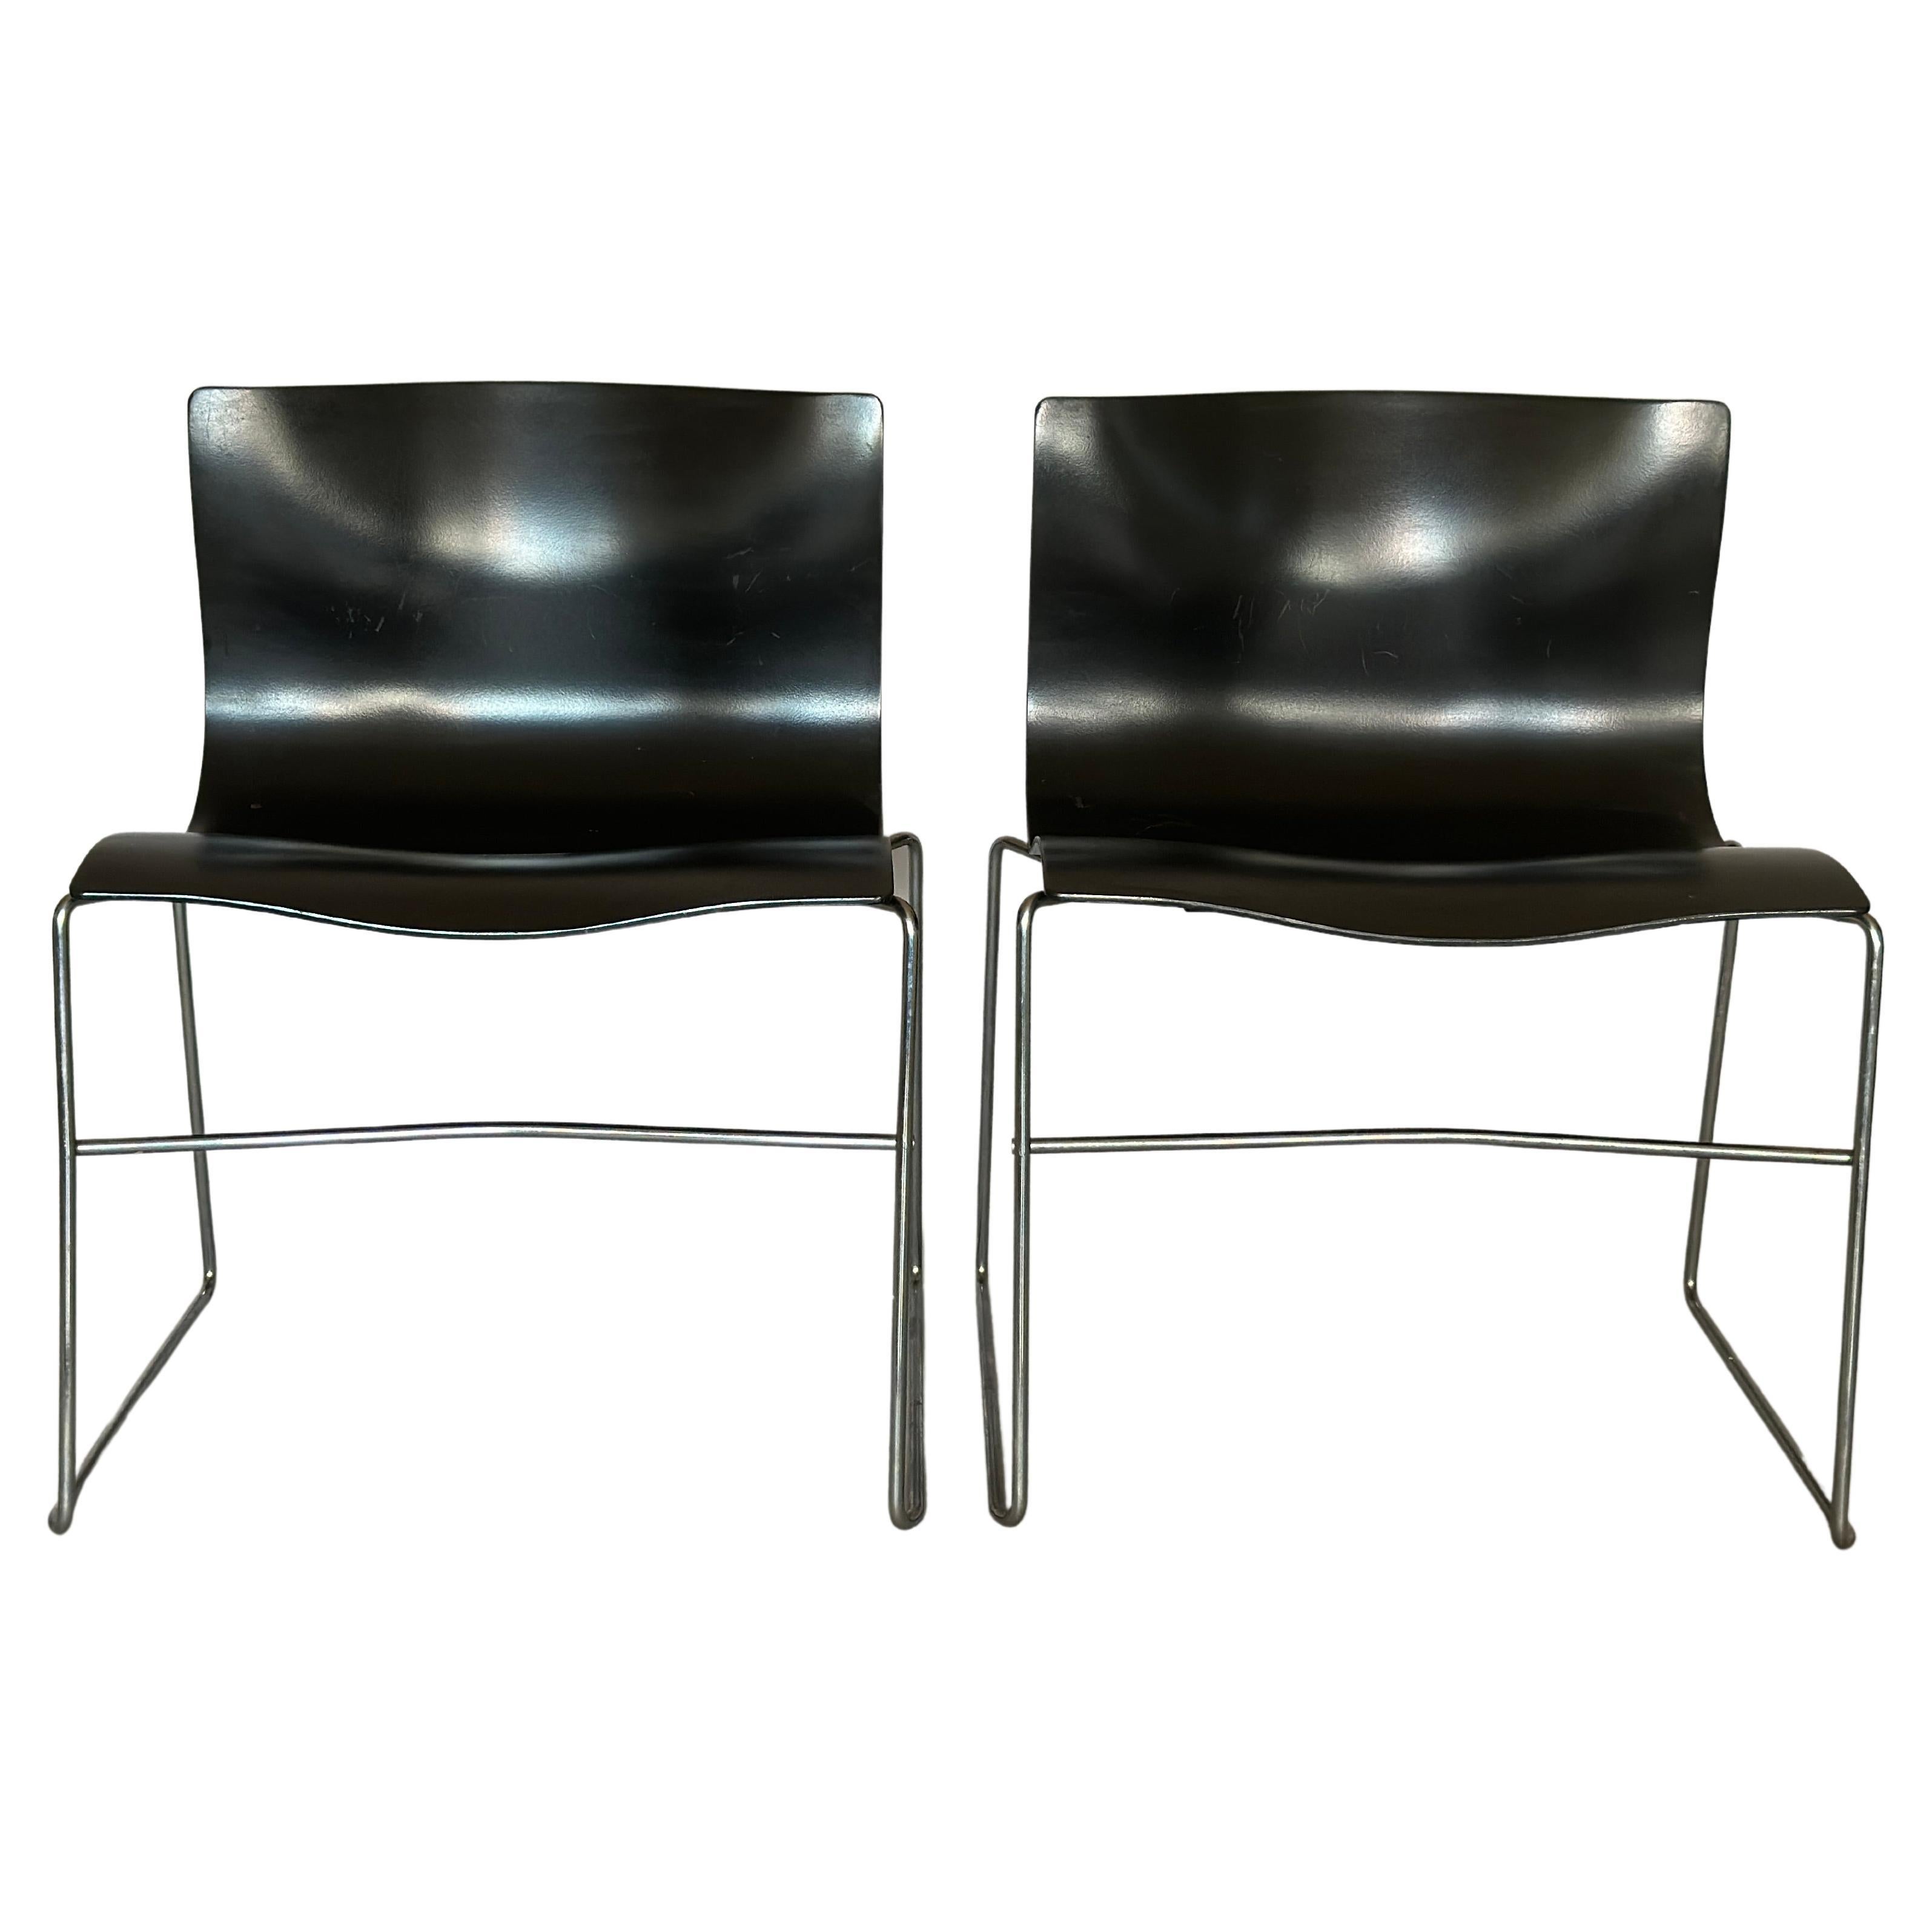 Knoll chairs by Massimo Vagnelli 1985 For Sale